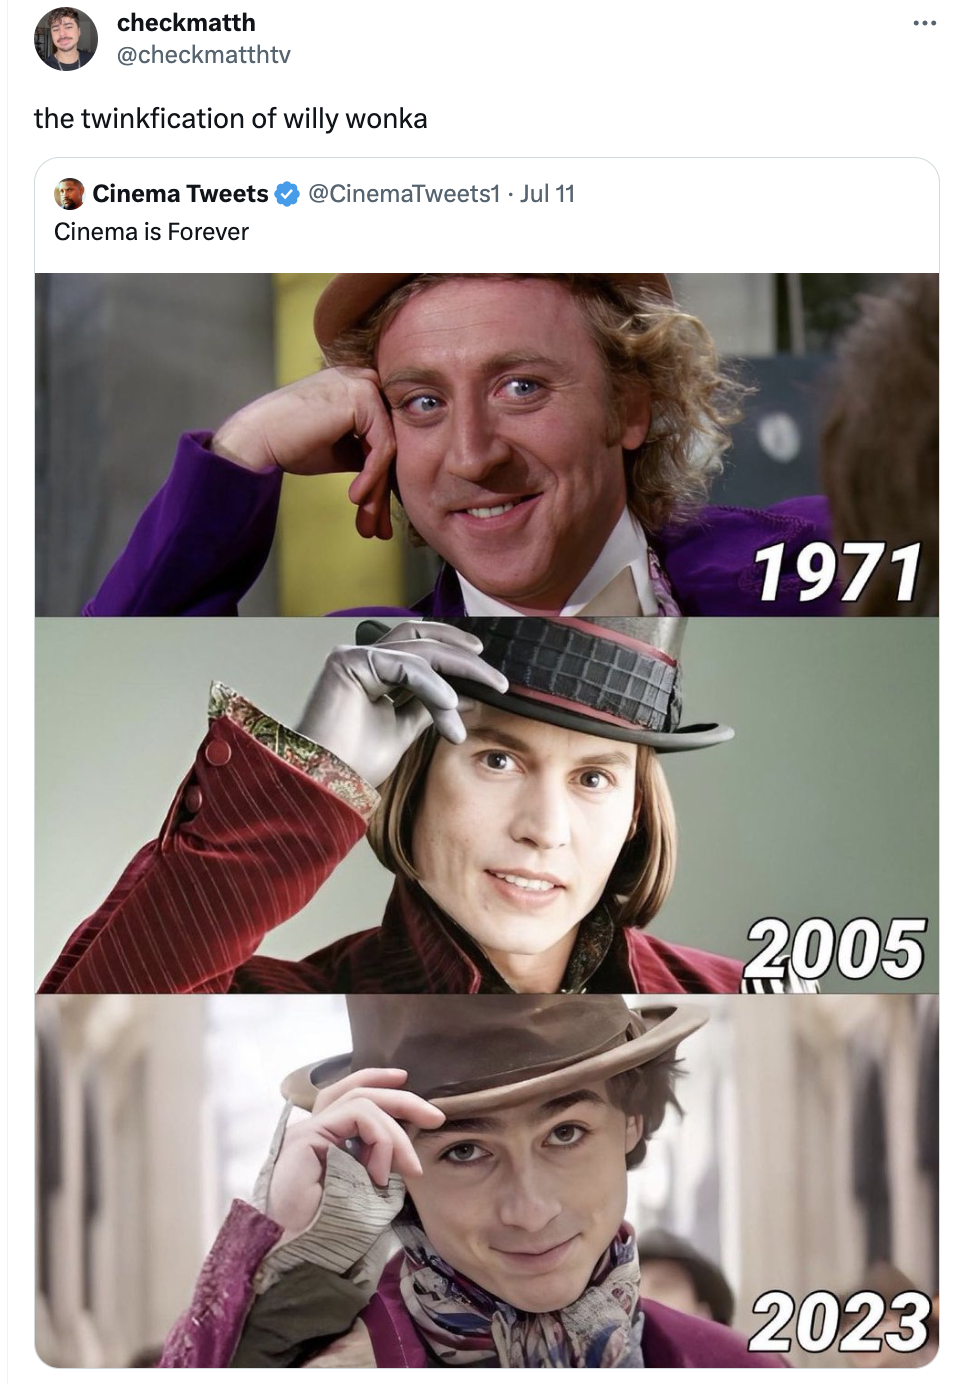 wonka memes - willy wonka meme - checkmatth the twinkfication of willy wonka Cinema Tweets Jul 11 Cinema is Forever m 1971 2005 2023